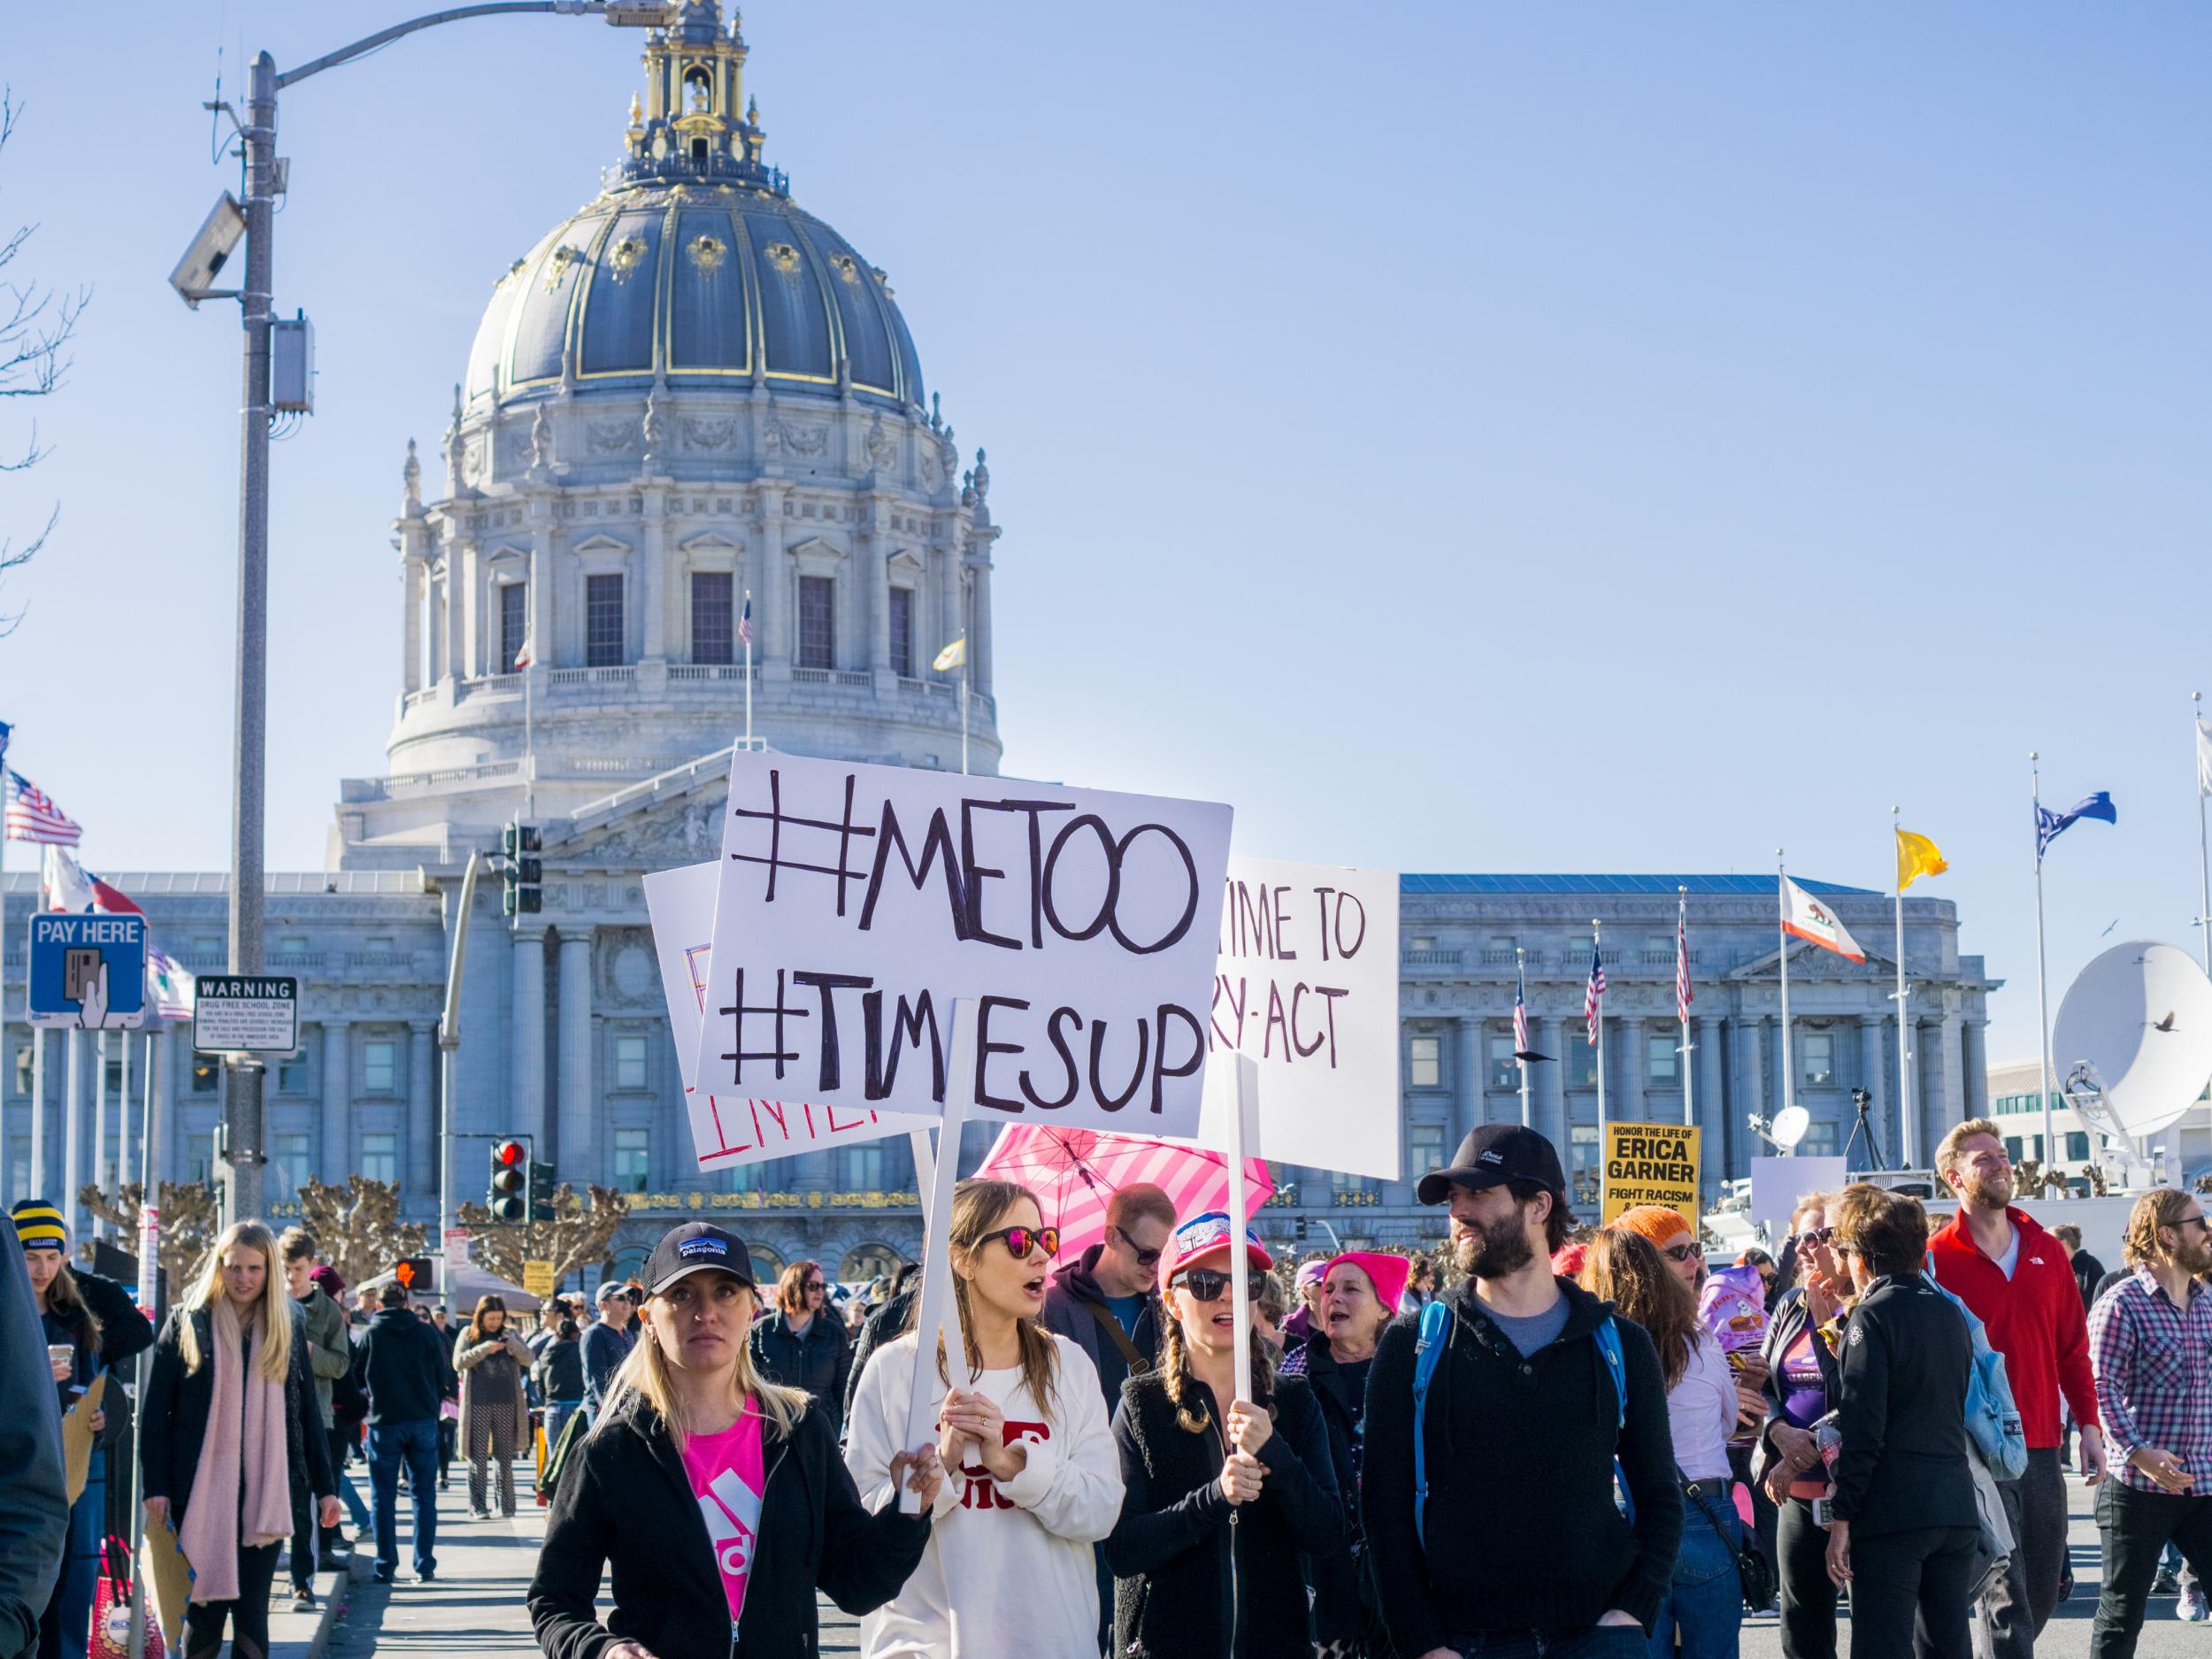 The #MeToo movement precipitated a change in attitudes, but more remains to be done